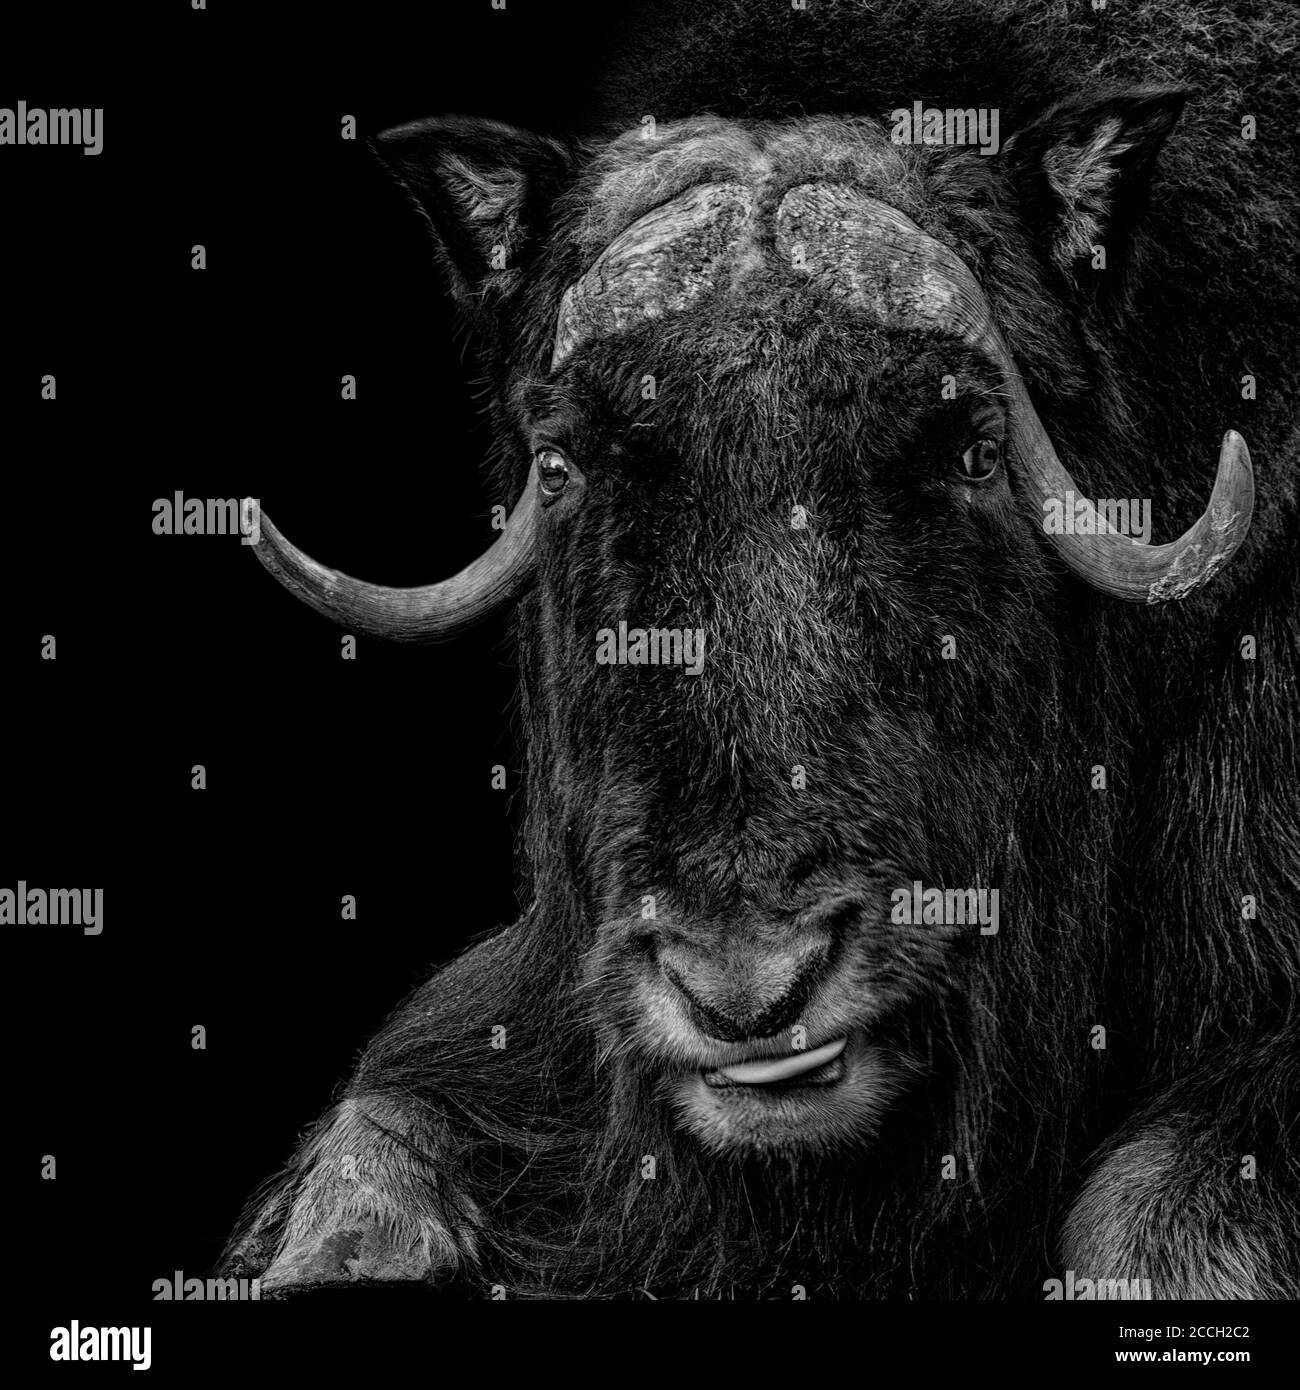 Muskox (Ovibos moschatus) with a black background Stock Photo